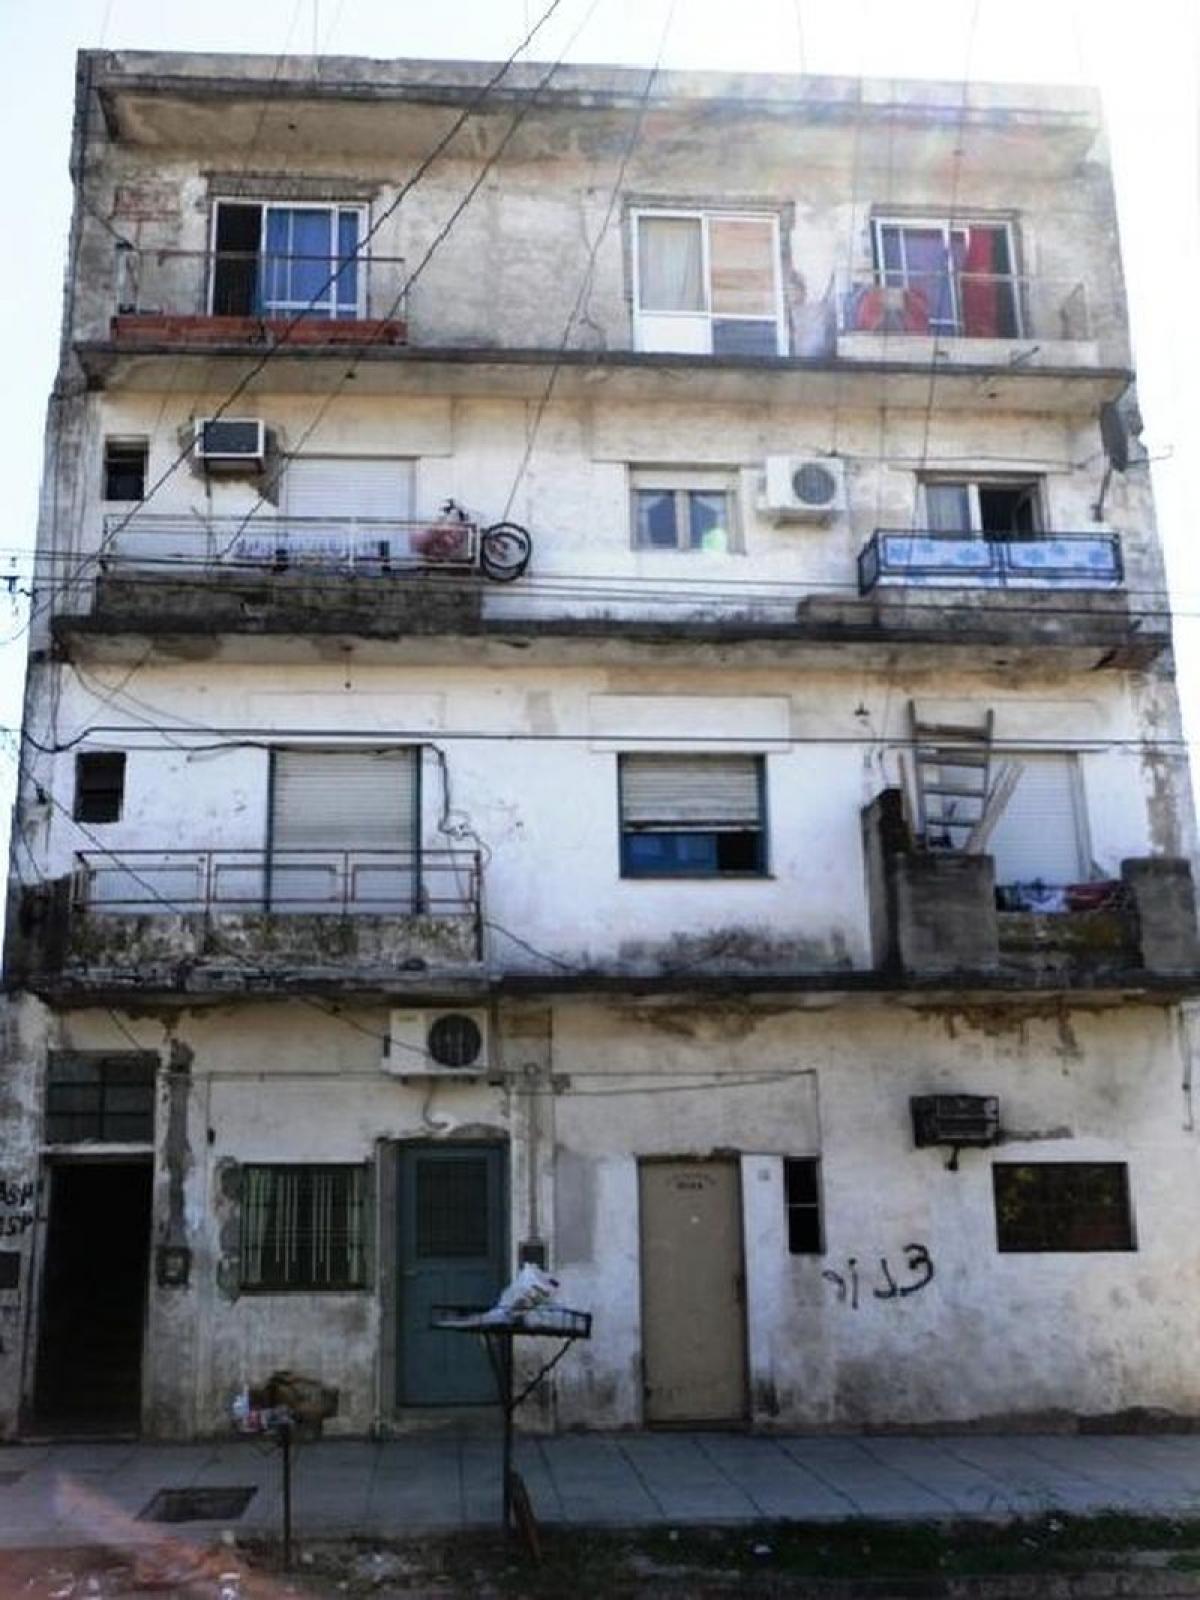 Picture of Apartment Building For Sale in La Matanza, Buenos Aires, Argentina